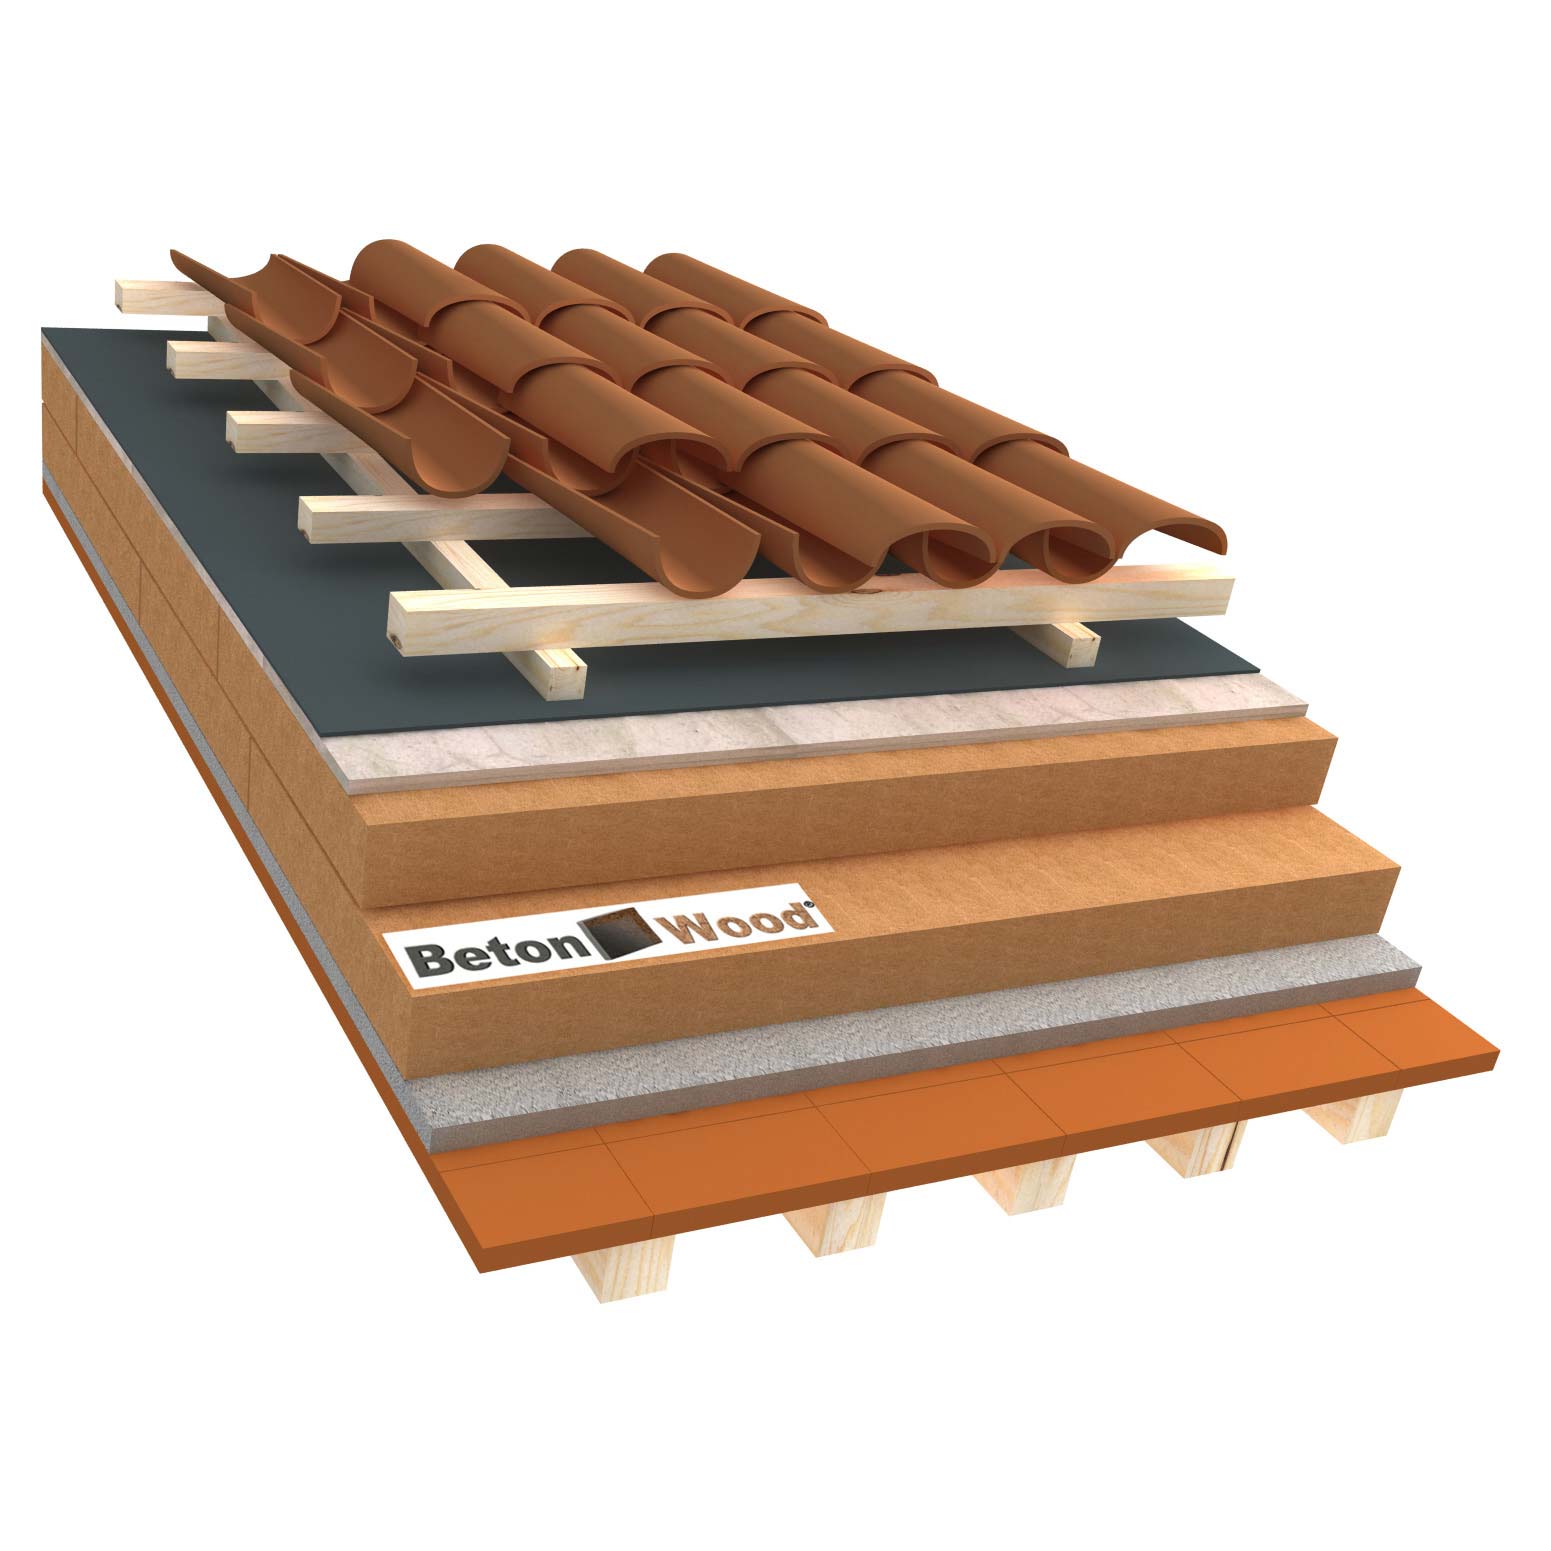 Ventilated roof with wood fiber Special and cement bonded particle boards on terracotta tiles